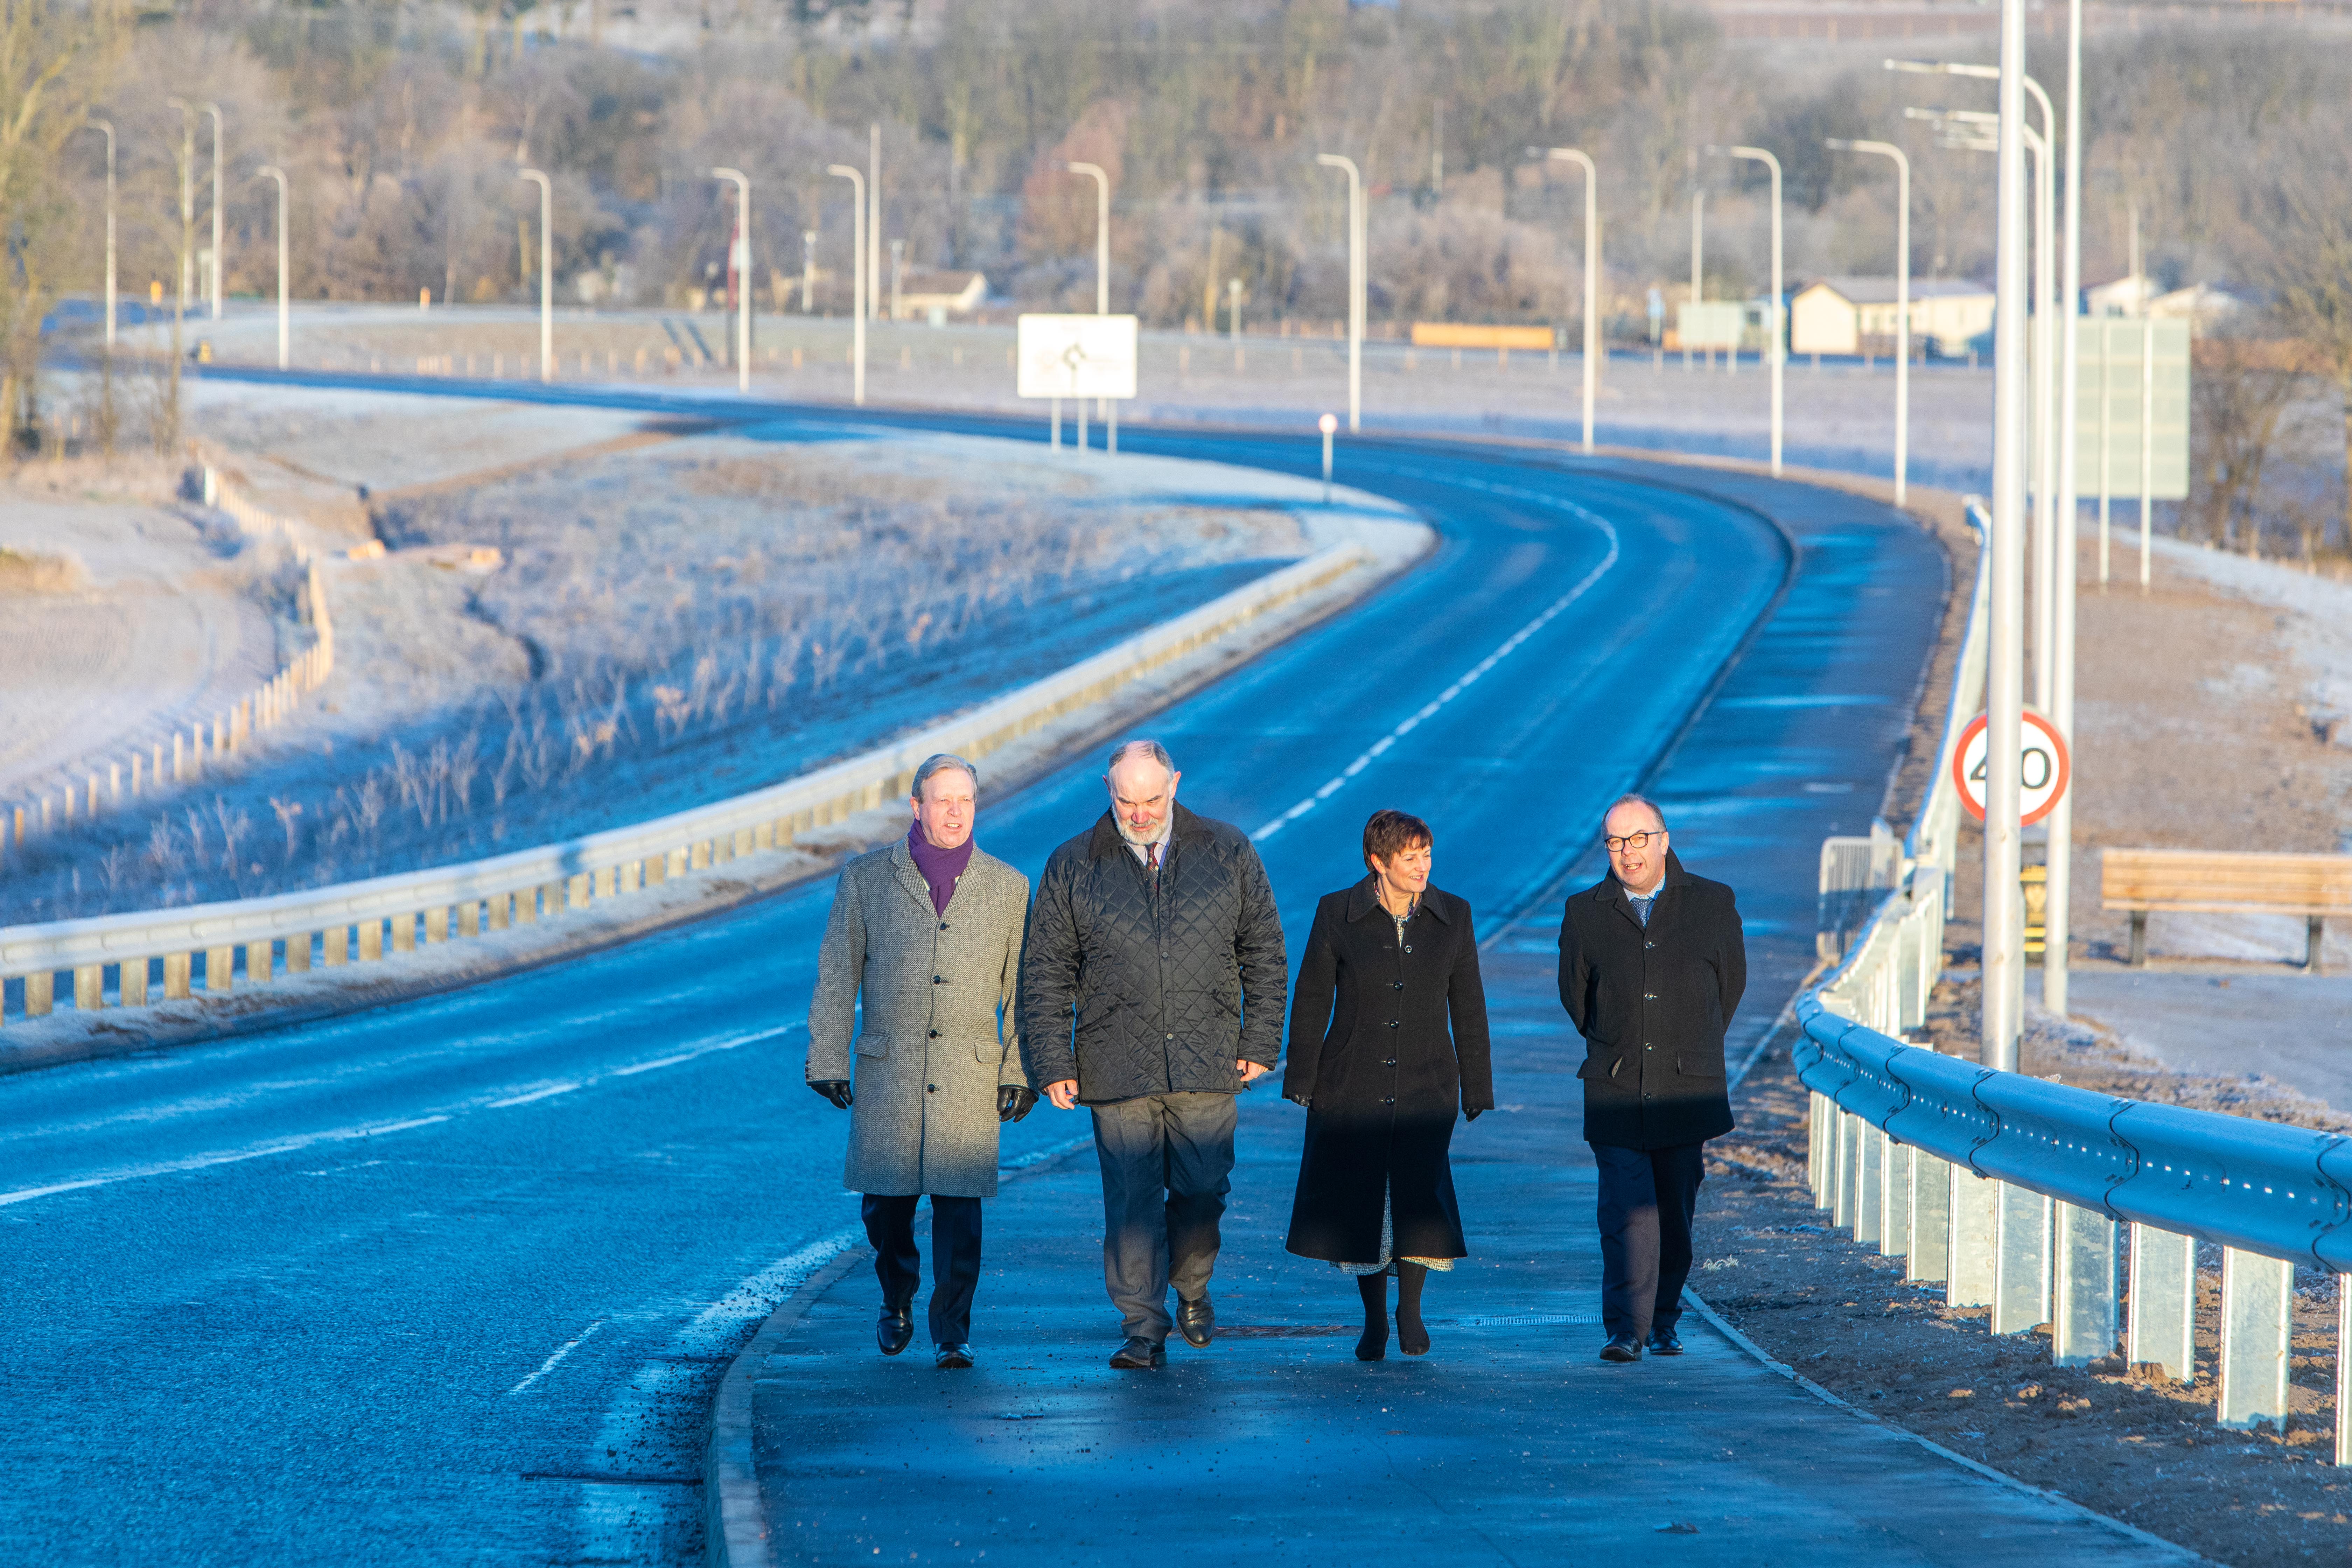 Peter Porteous, Cllr Murray Lyle, the council's Karen Reid and Stephen Scott of Balfour Beatty walk the path of newly opened section of A85.